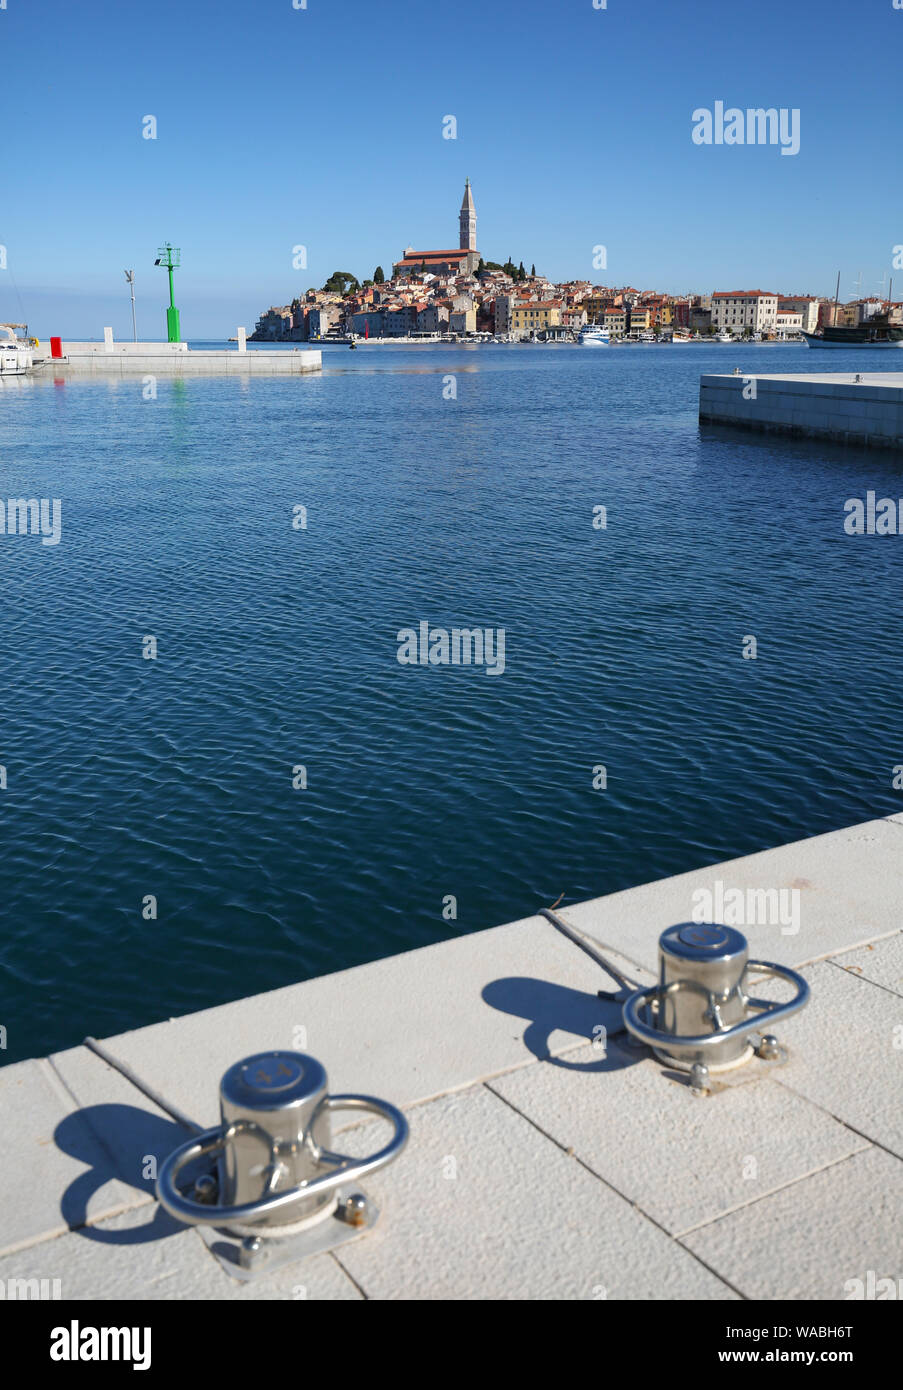 South end seaside promenadem in the five star ACI marina with city of Rovinj in the background, Istria, Croatia. Stock Photo